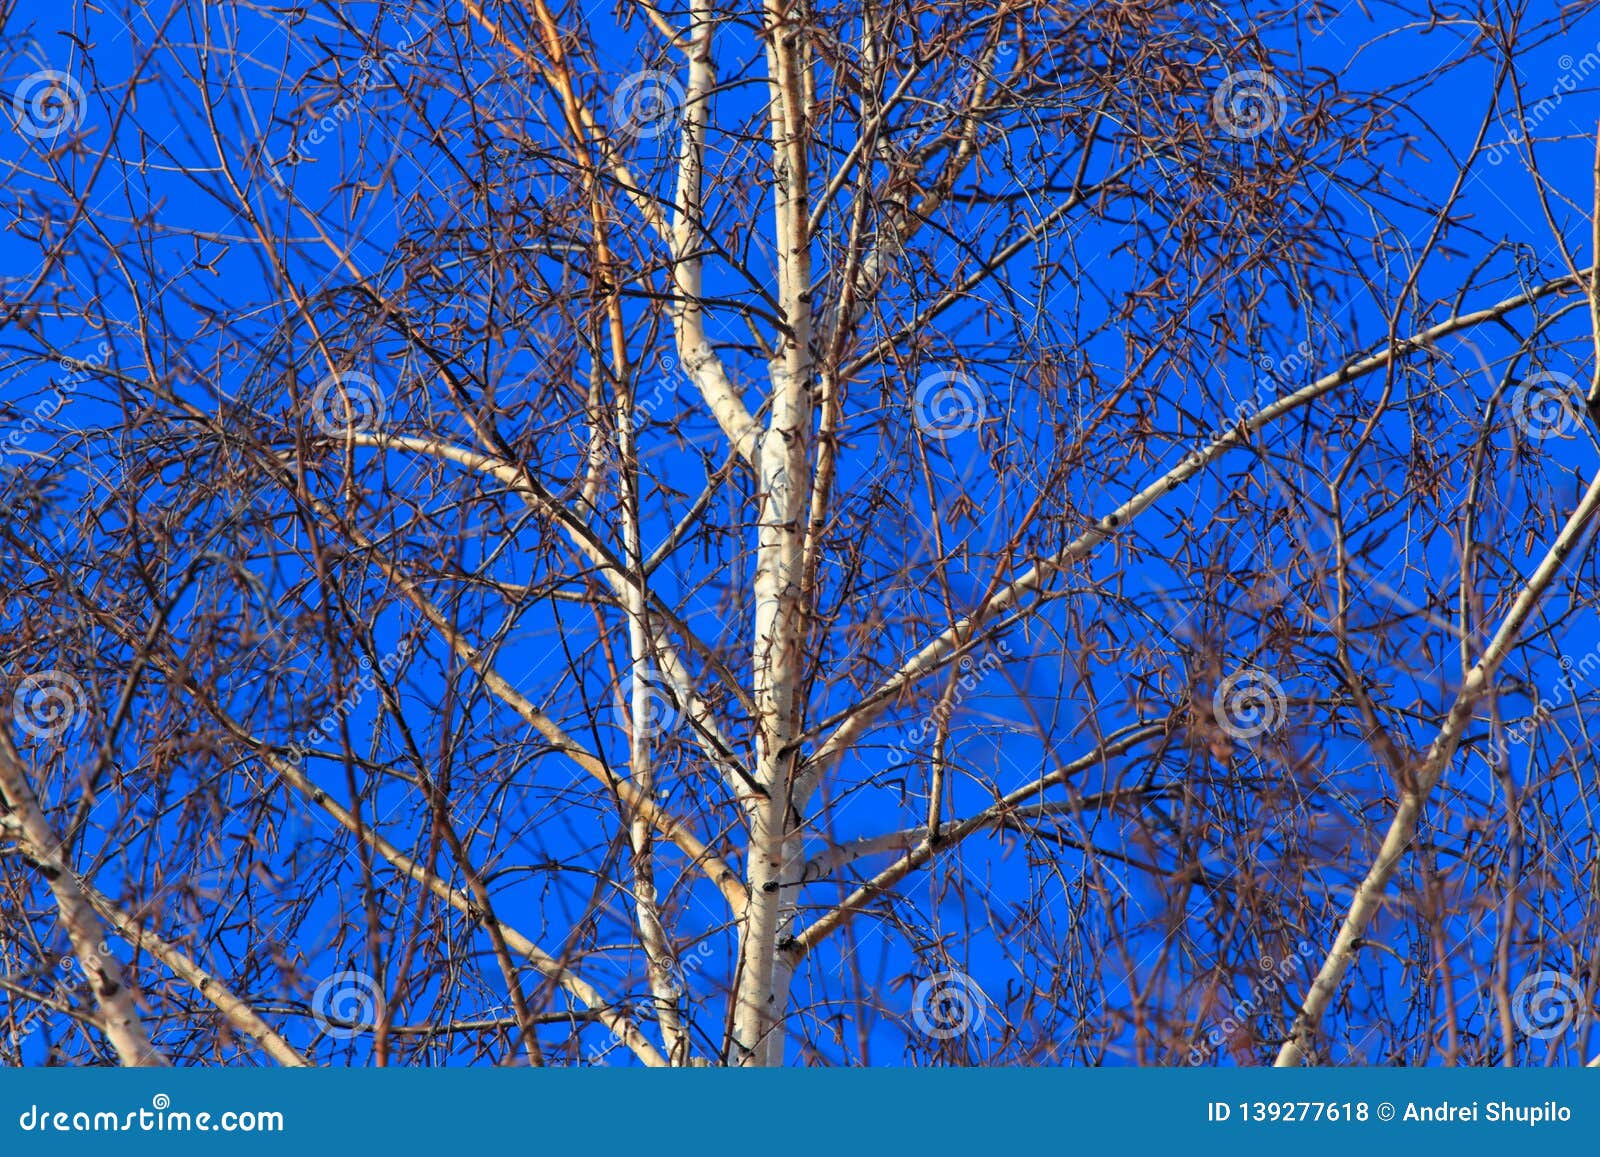 Naked Birch | My images are copyrighted. It is not allowed 